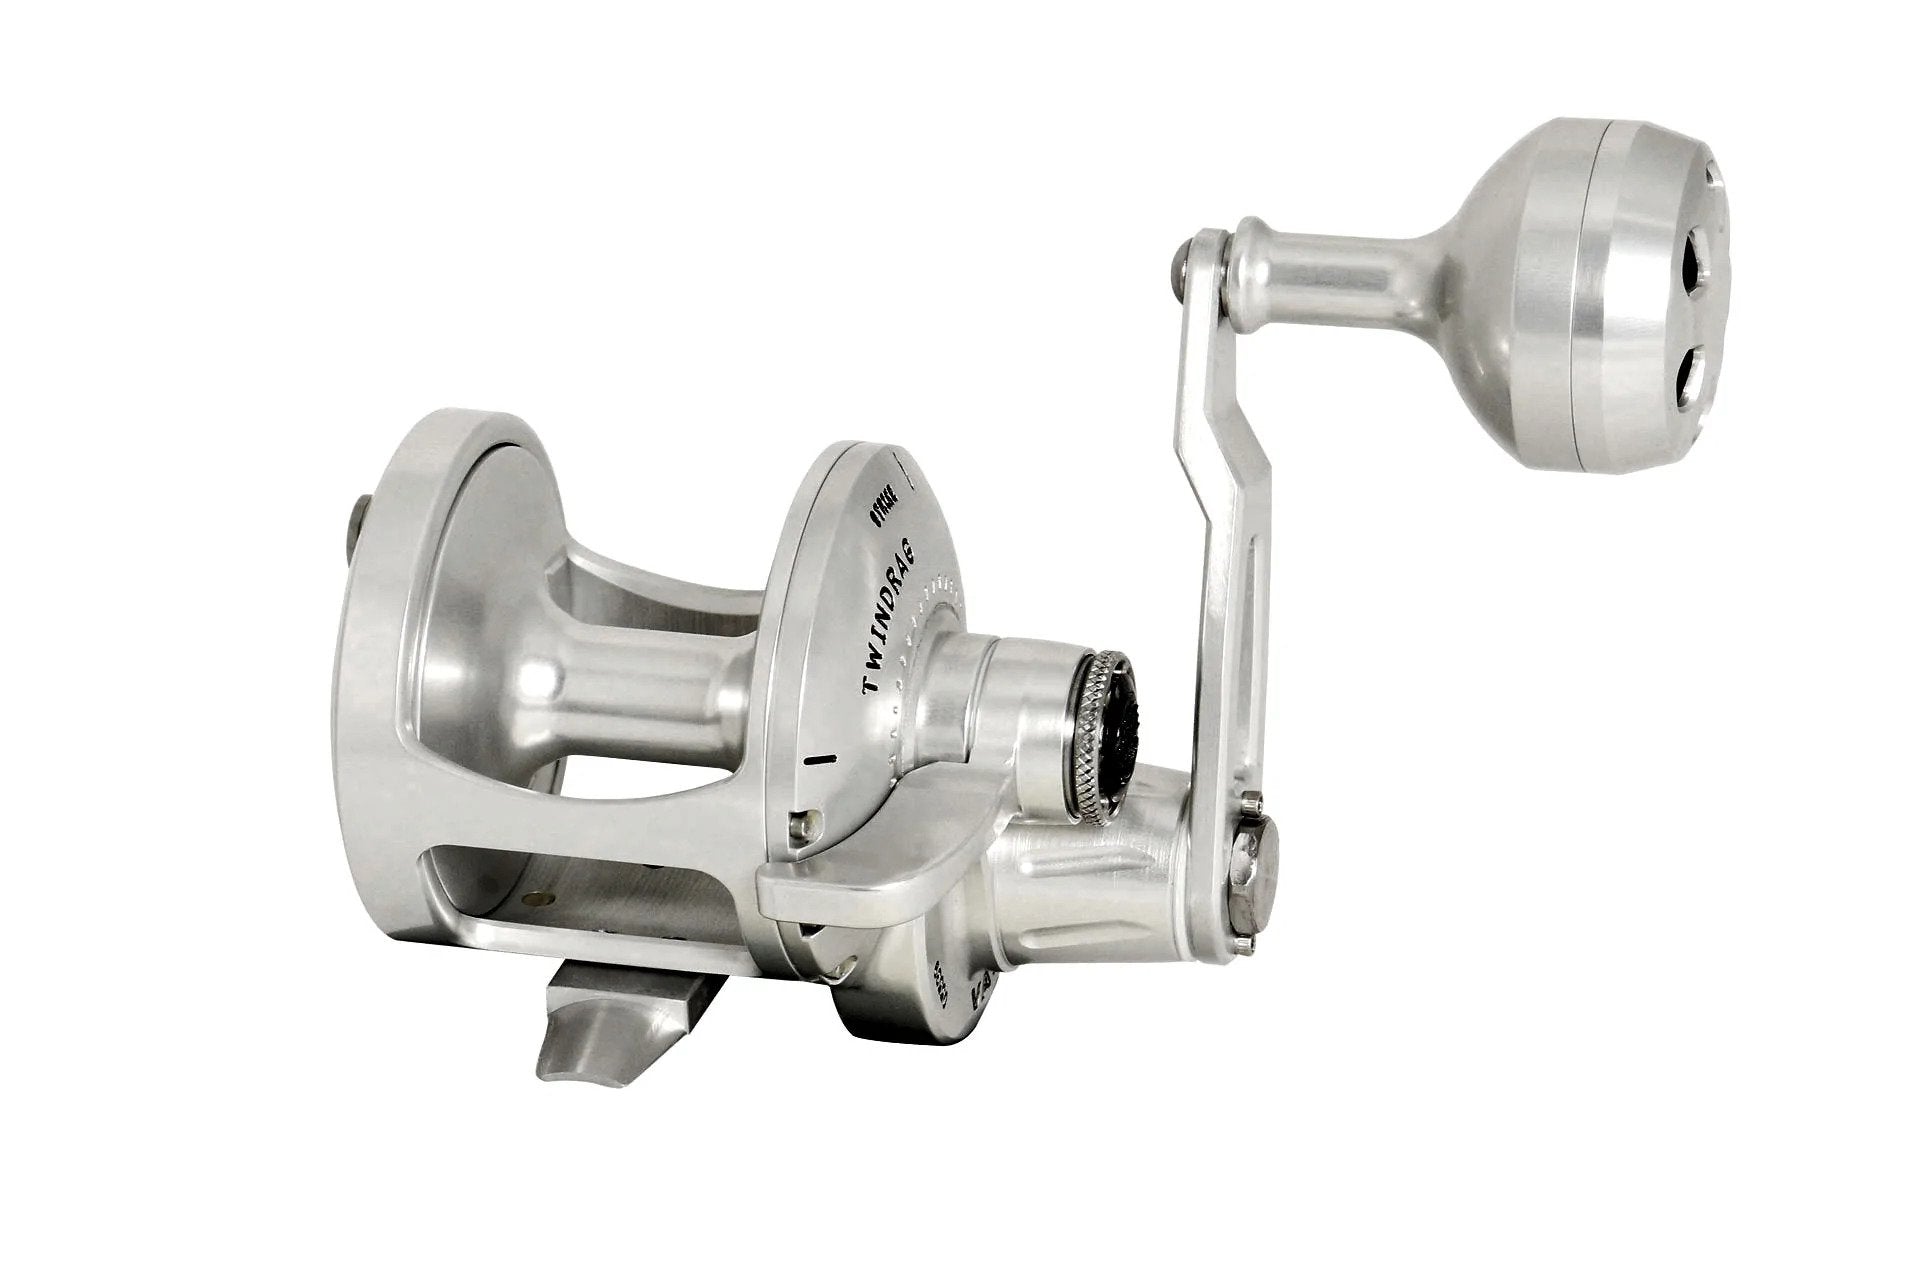 Accurate Valiant Conventional Reel BV-600-S